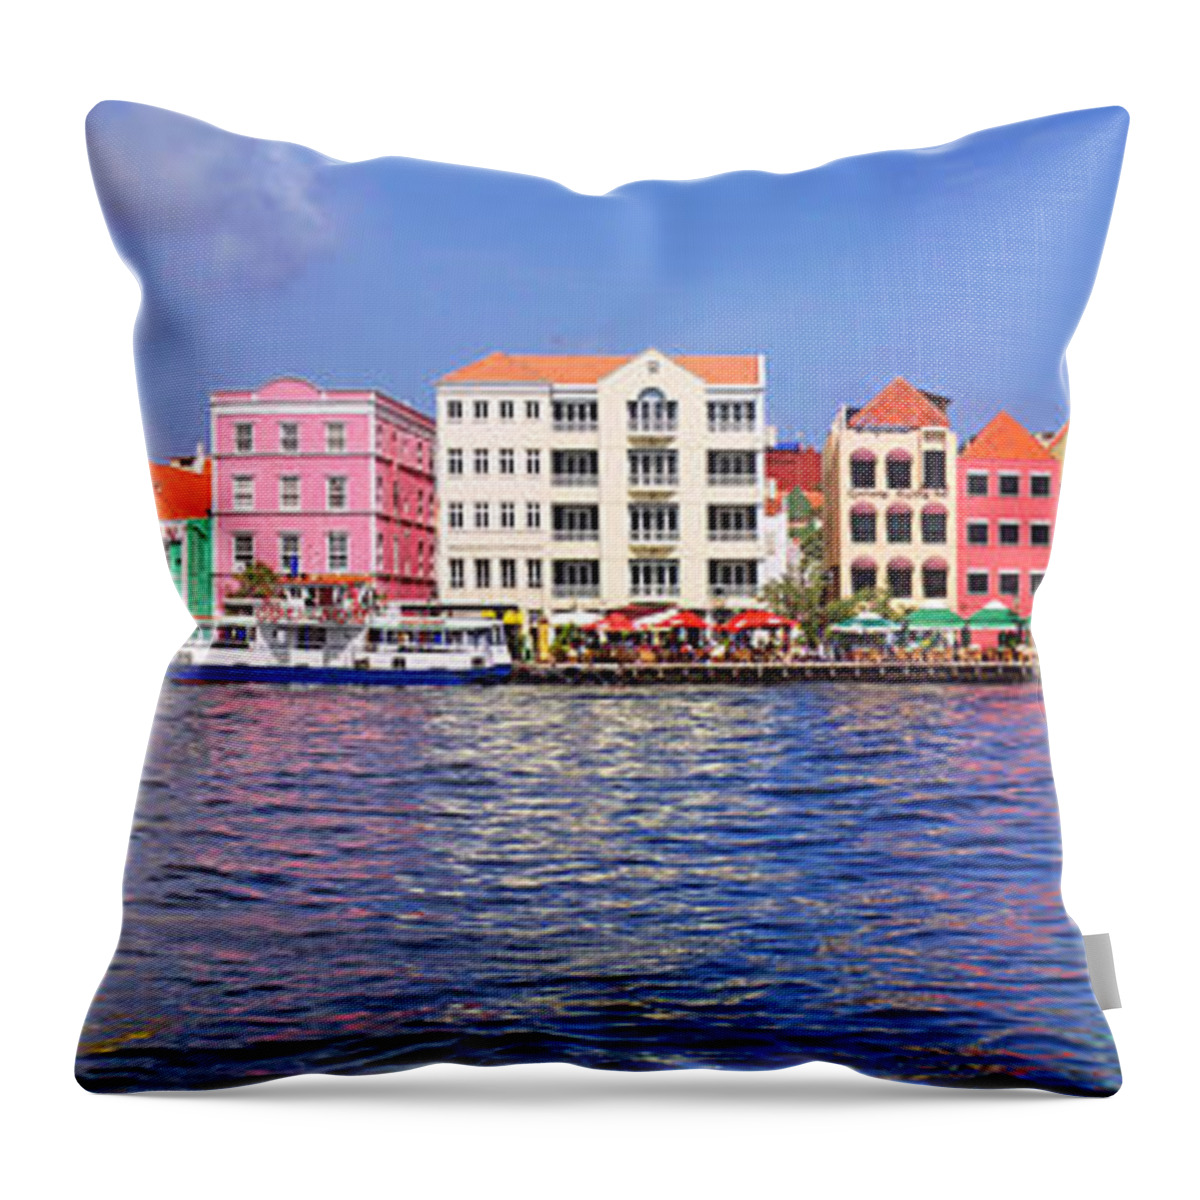 Photography Throw Pillow featuring the photograph Buildings At The Waterfront #4 by Panoramic Images